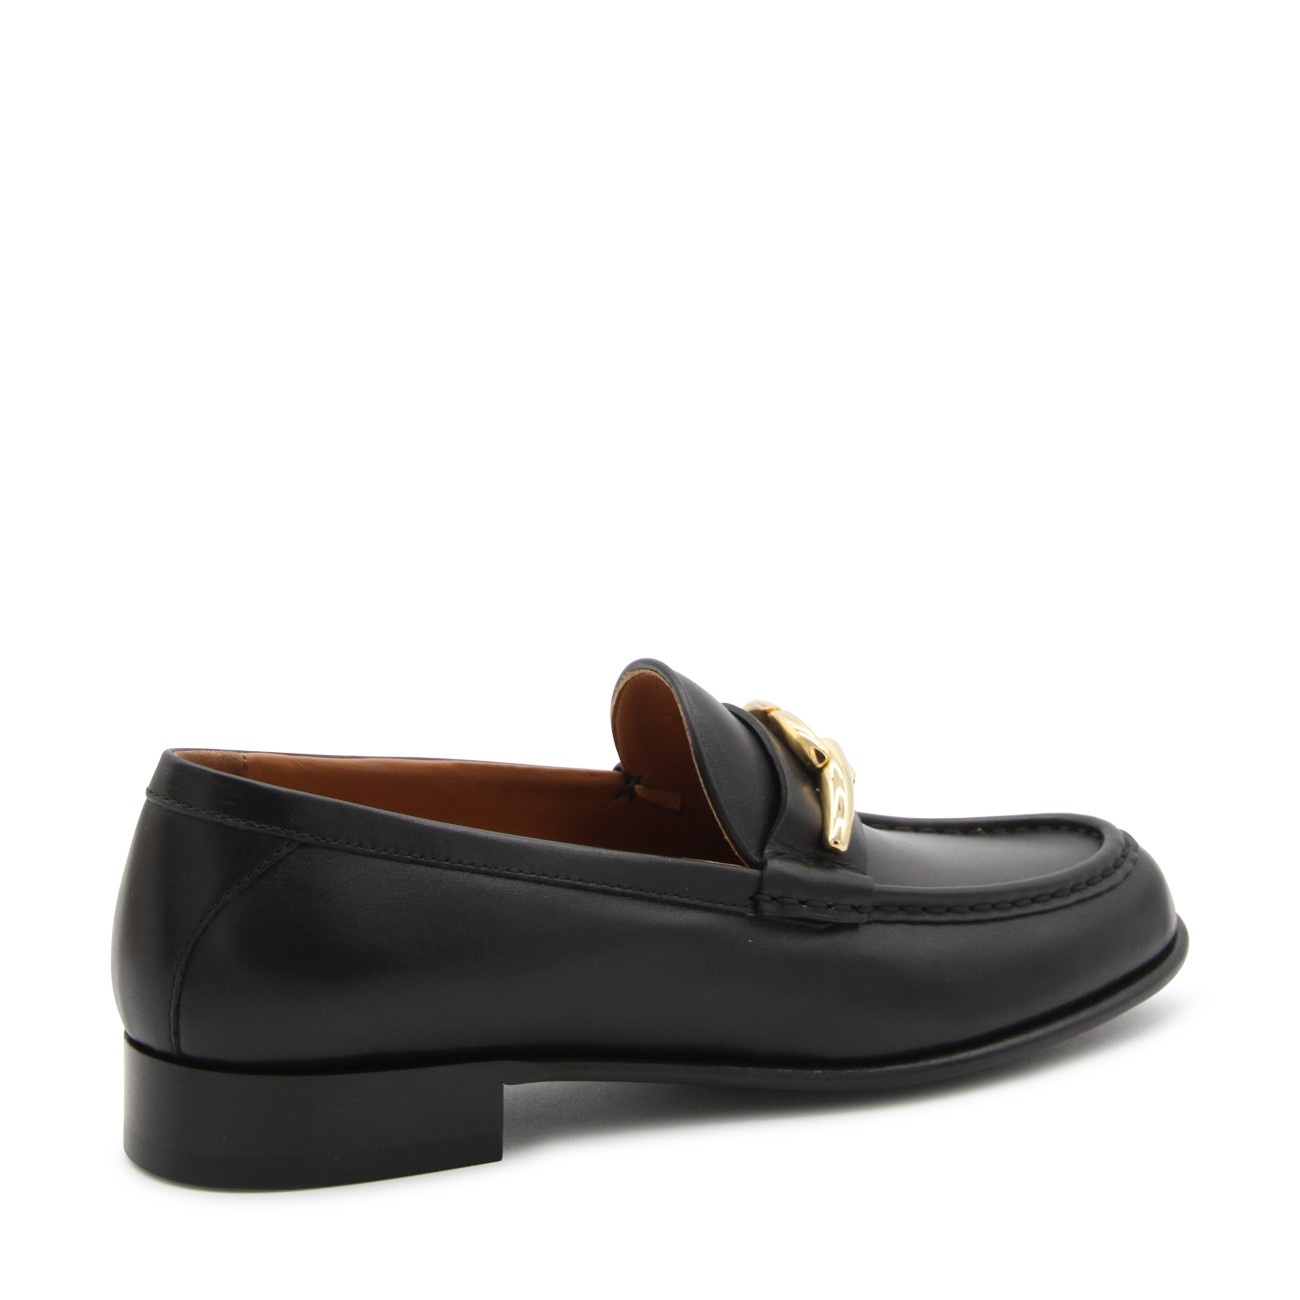 black leather loafers - 3